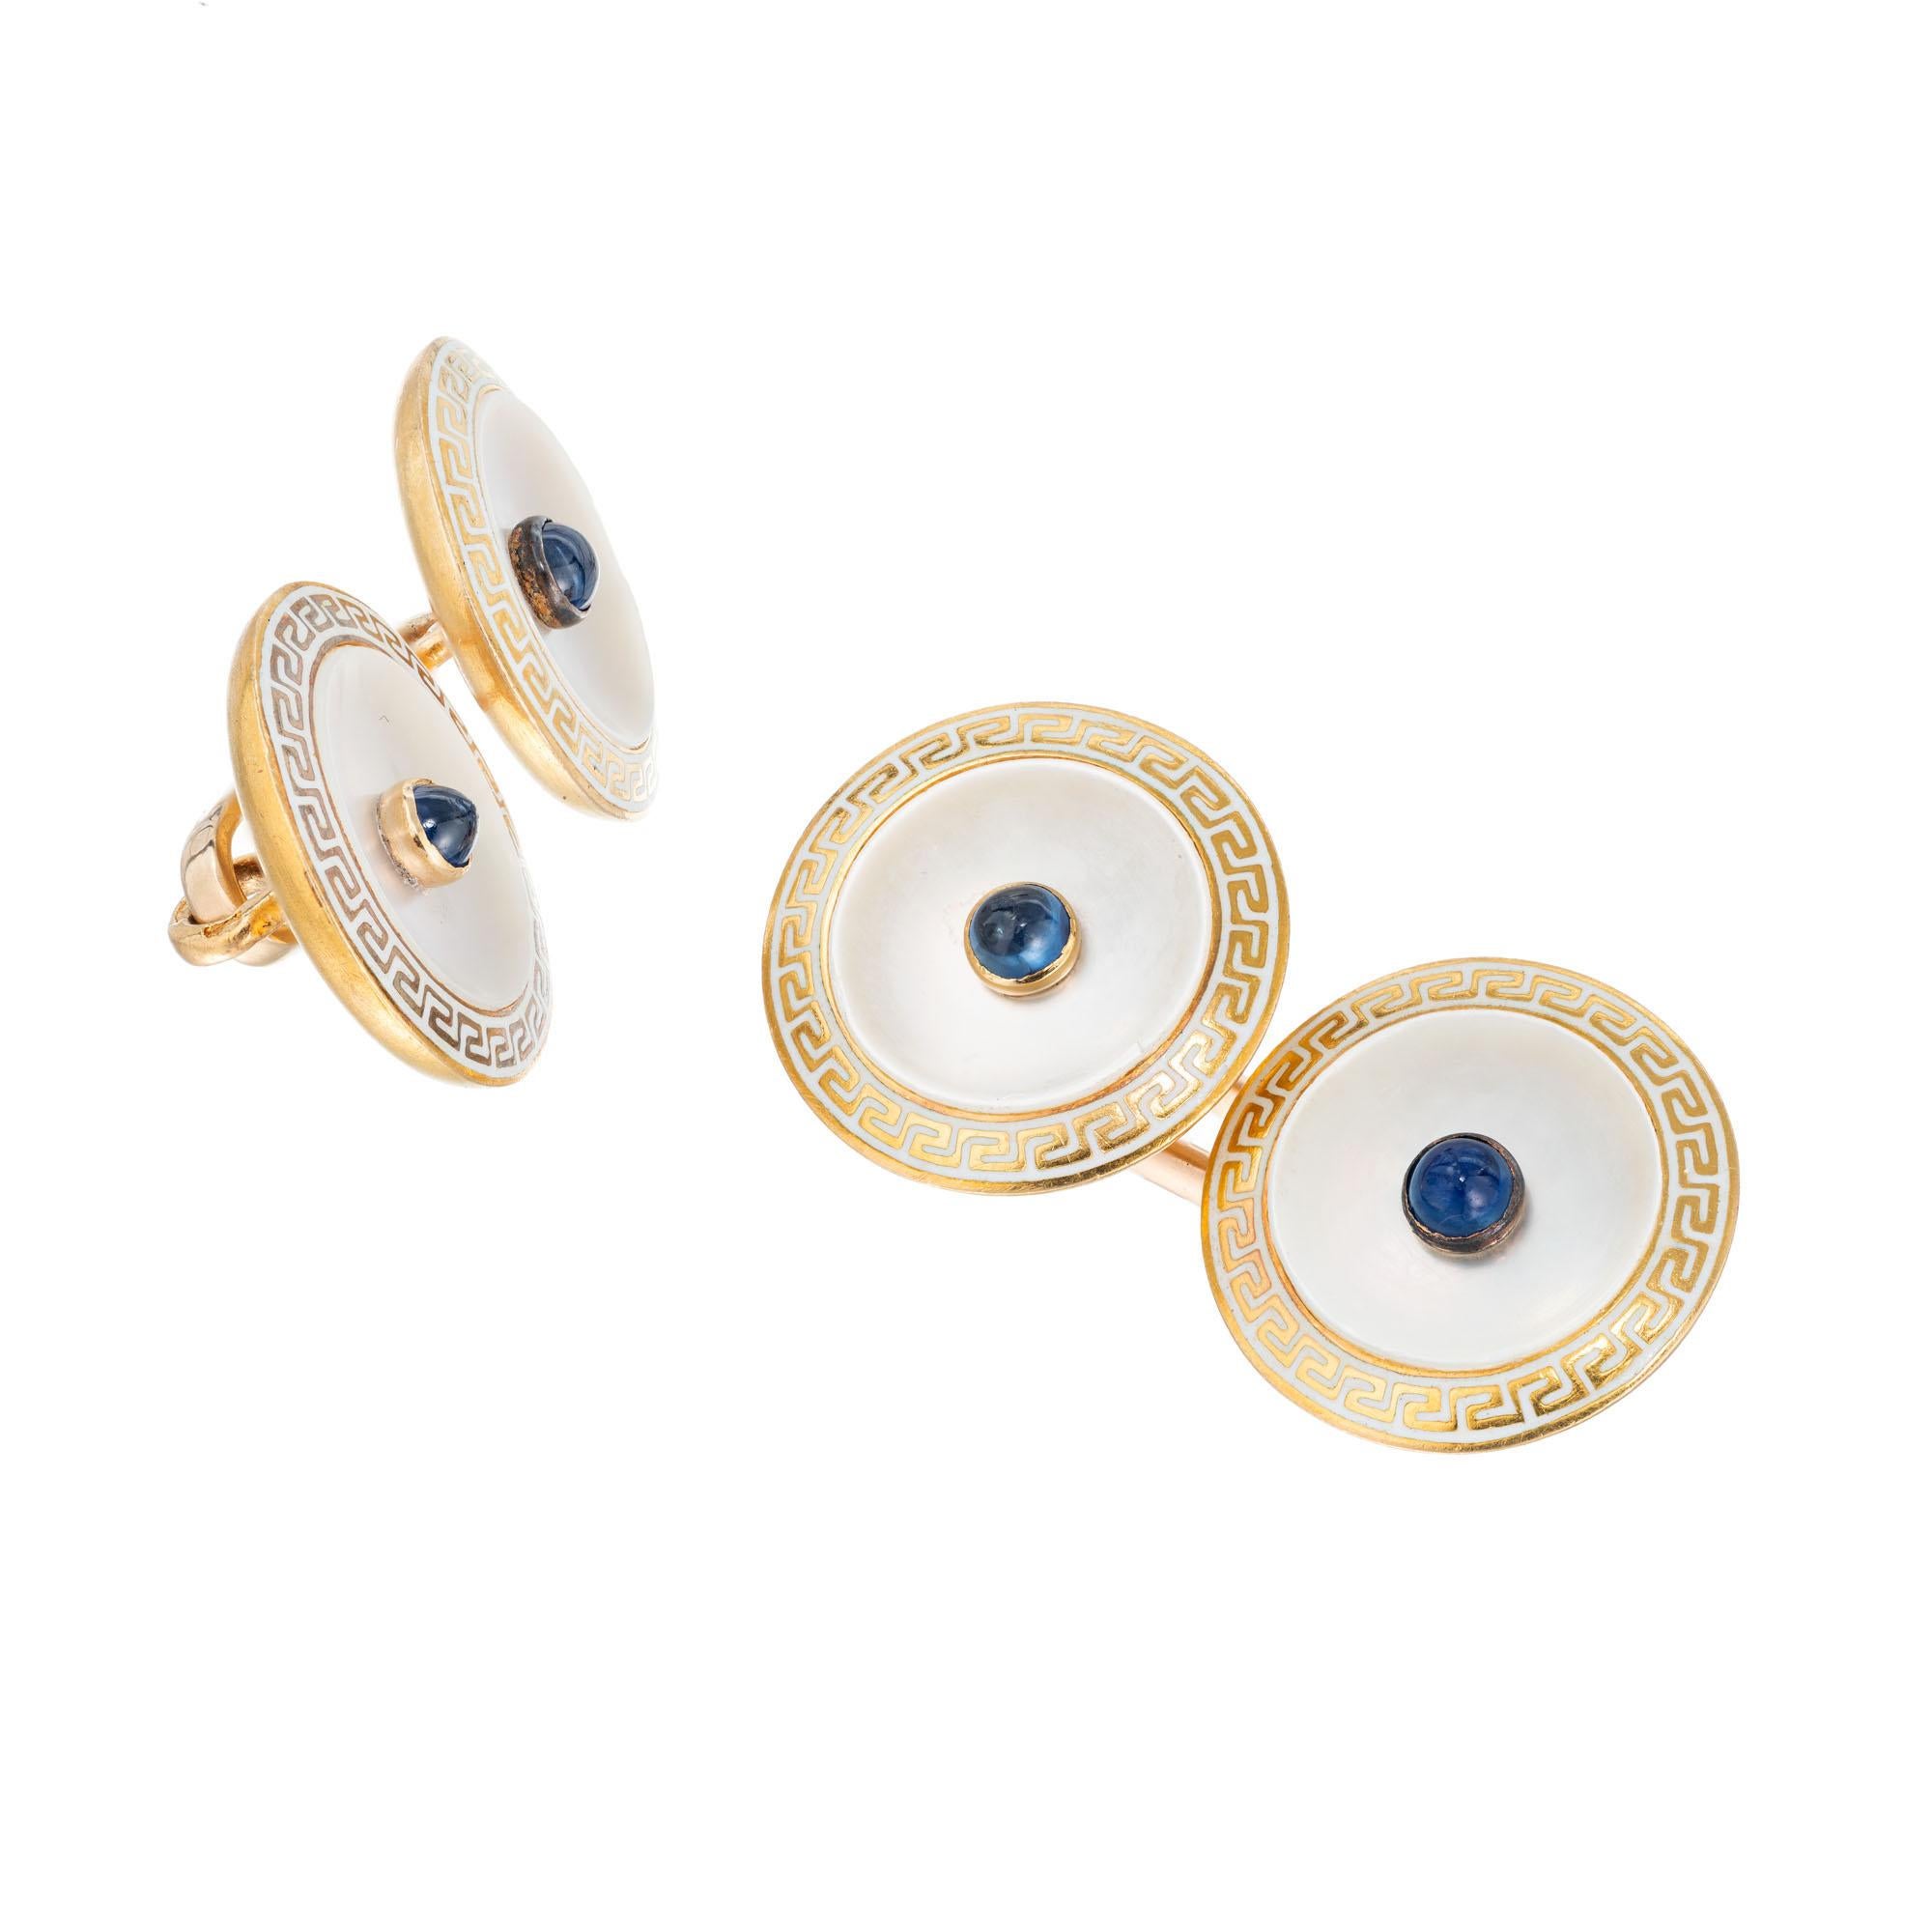 Early 1900's double sided cufflinks in 14k yellow gold with mother of pearl, cabochon sapphire and white enamel Greek key border.

4 round cabochon blue sapphires, approx. .20cts
4 discs of white mother of pearl 
14k yellow gold 
Tested: 14k
8.8